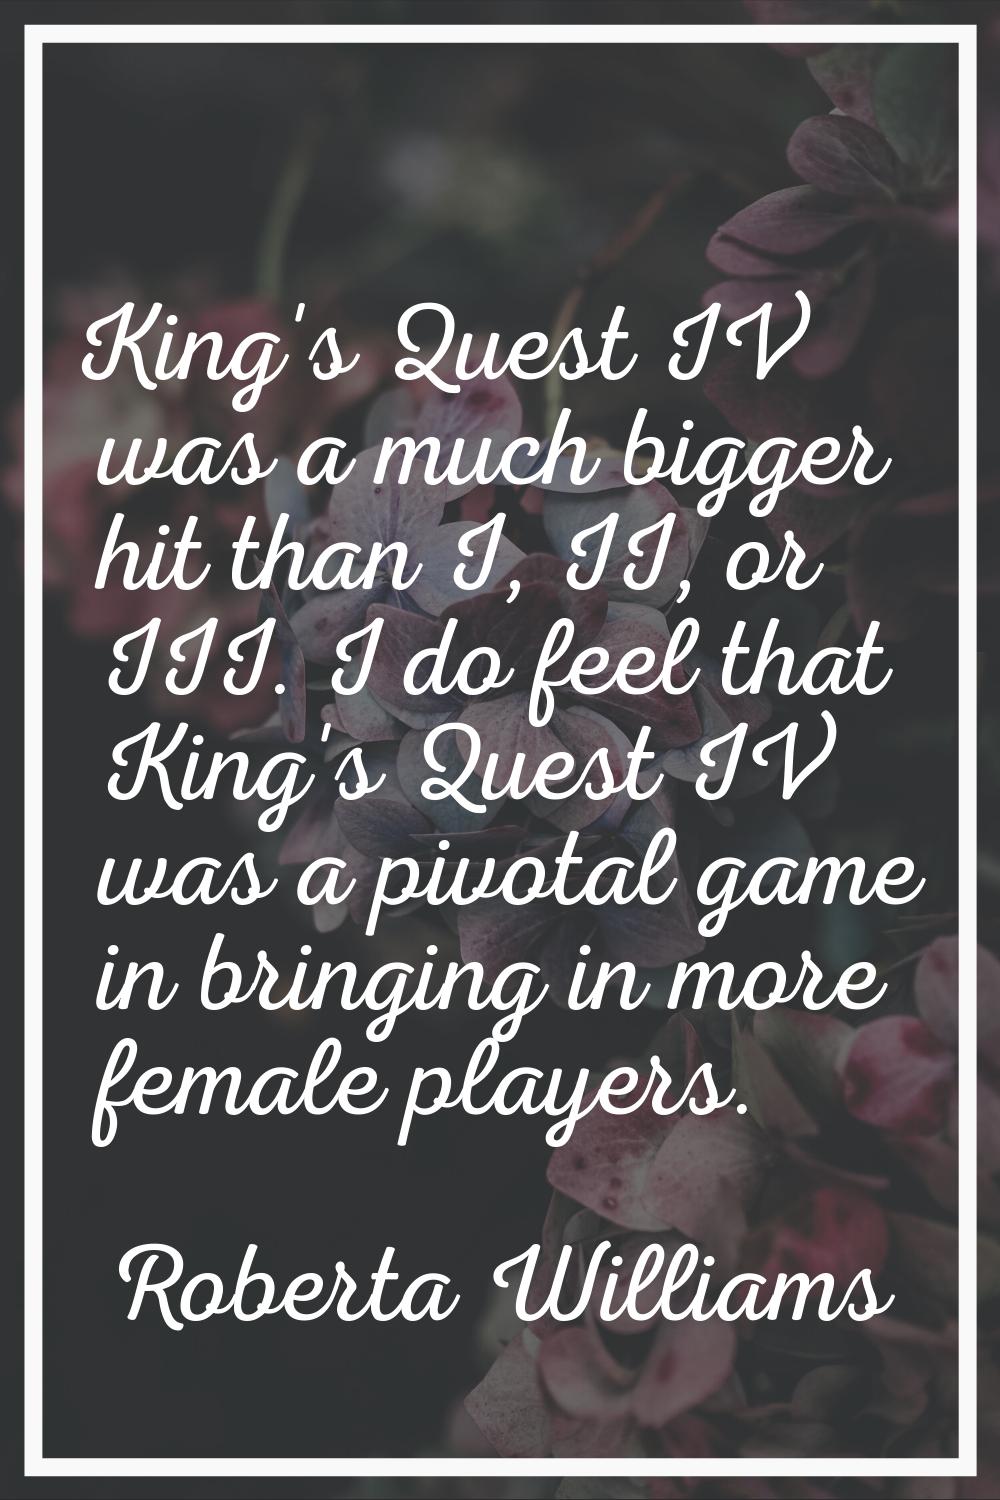 King's Quest IV was a much bigger hit than I, II, or III. I do feel that King's Quest IV was a pivo